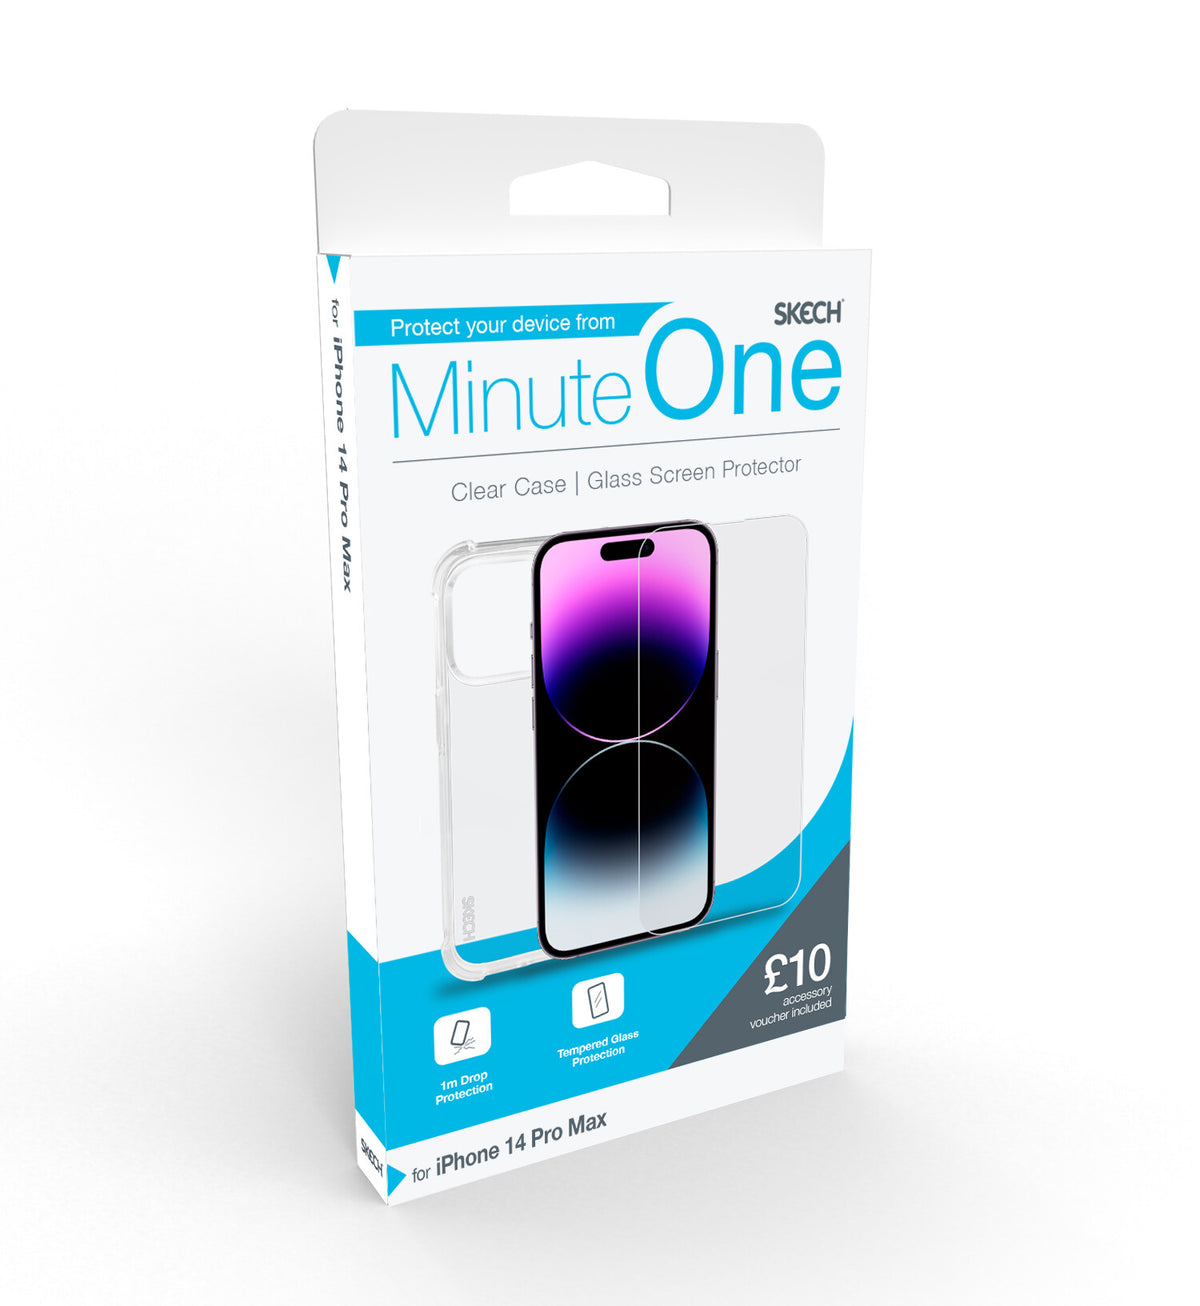 Skech Minute One Bundle for iPhone 14 Pro Max